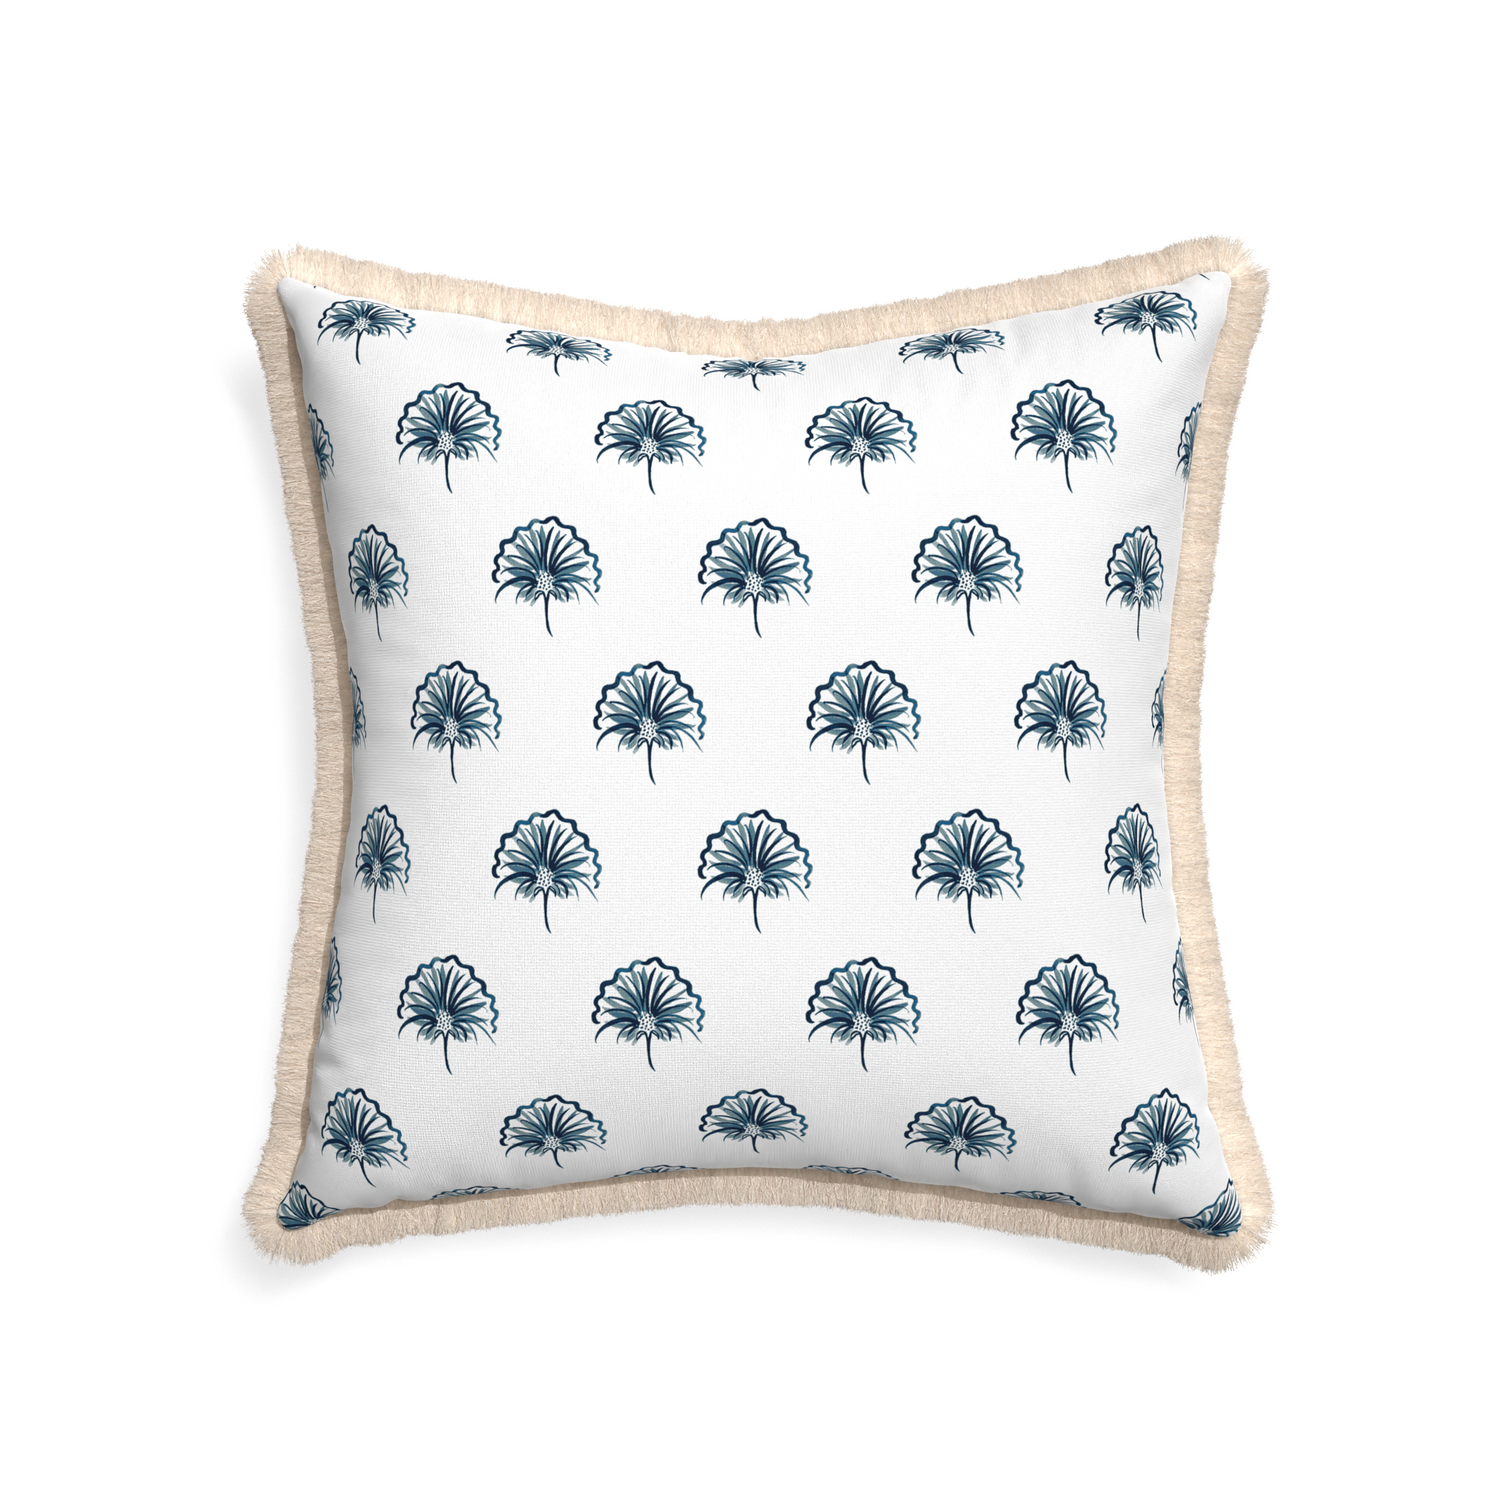 22-square penelope midnight custom floral navypillow with cream fringe on white background